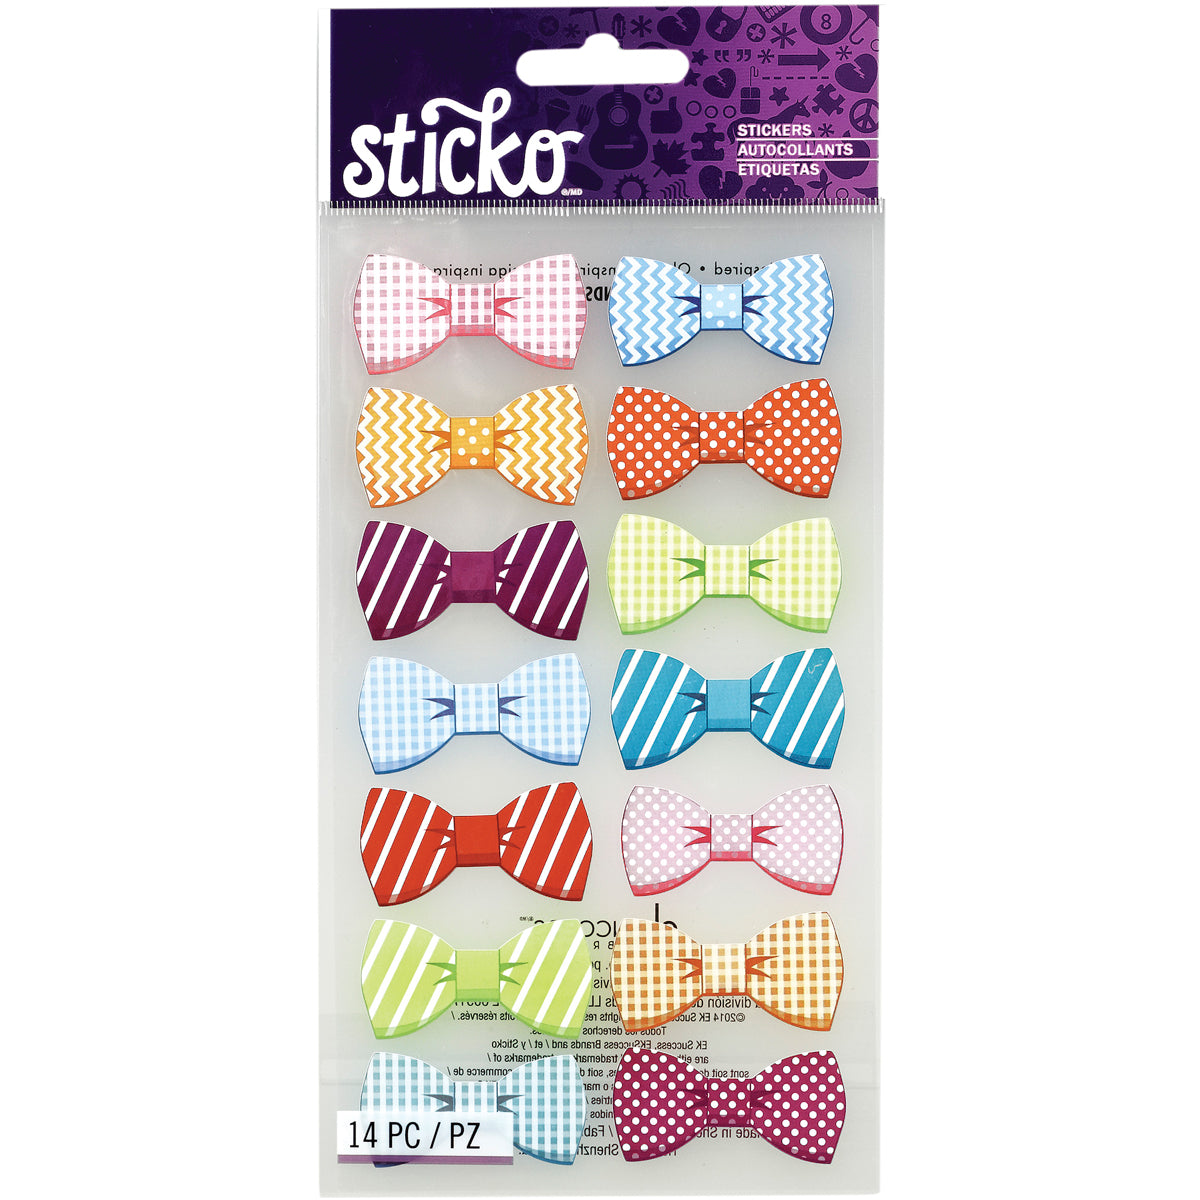 Sticko Stickers-Pattern Bows